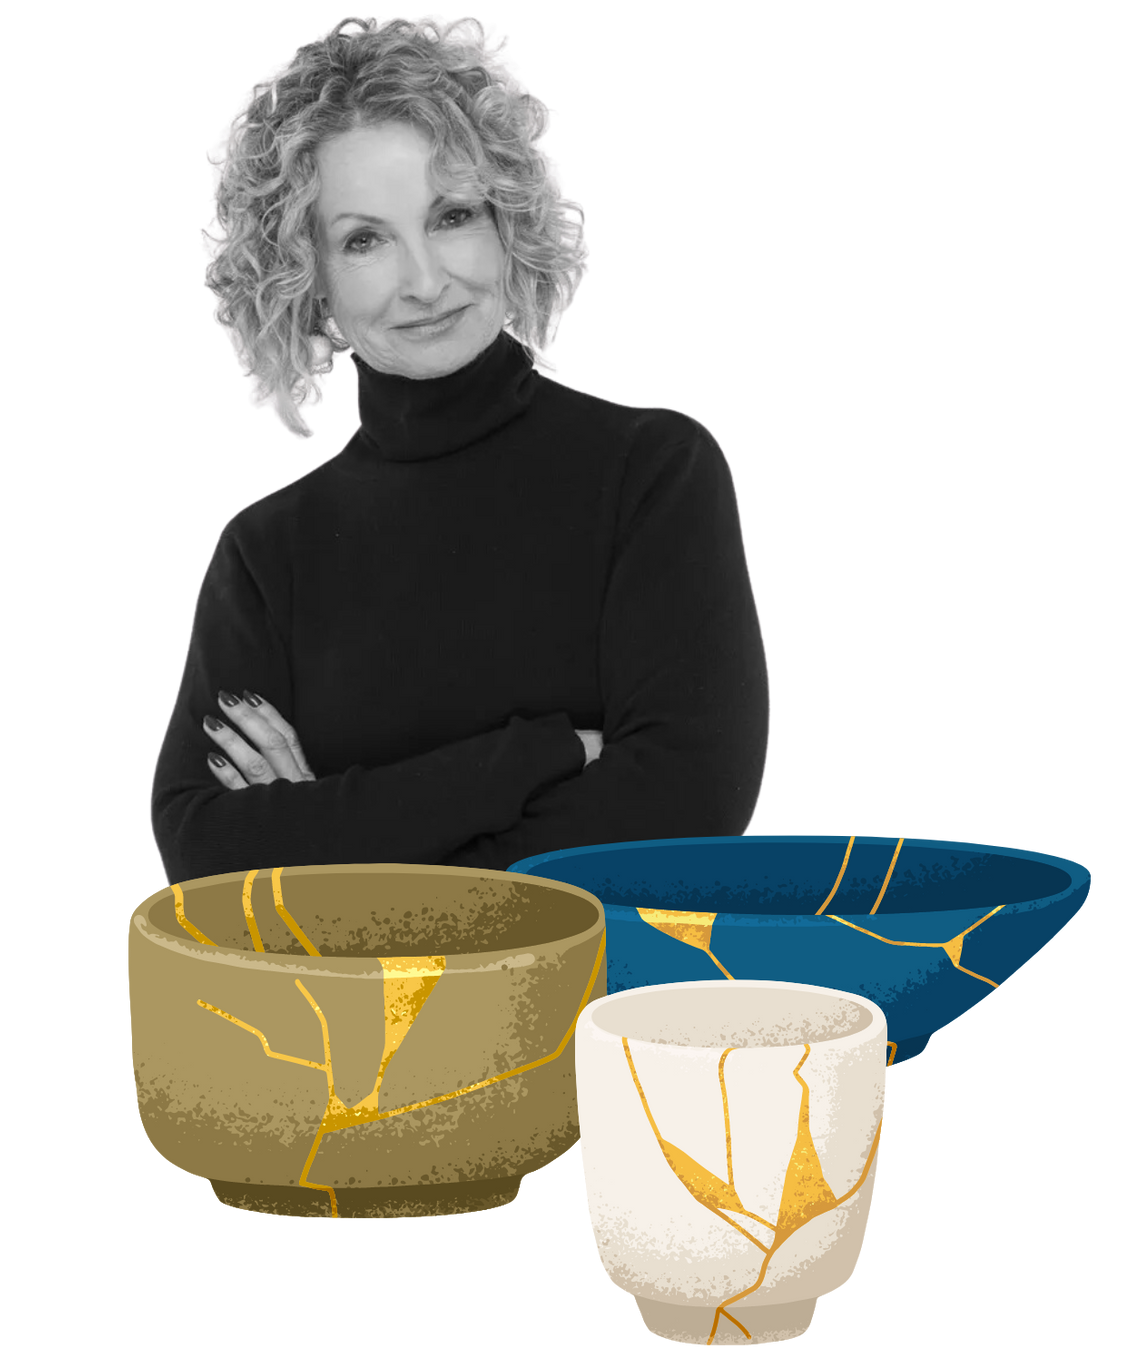 A woman in a black turtleneck is standing next to three bowls.